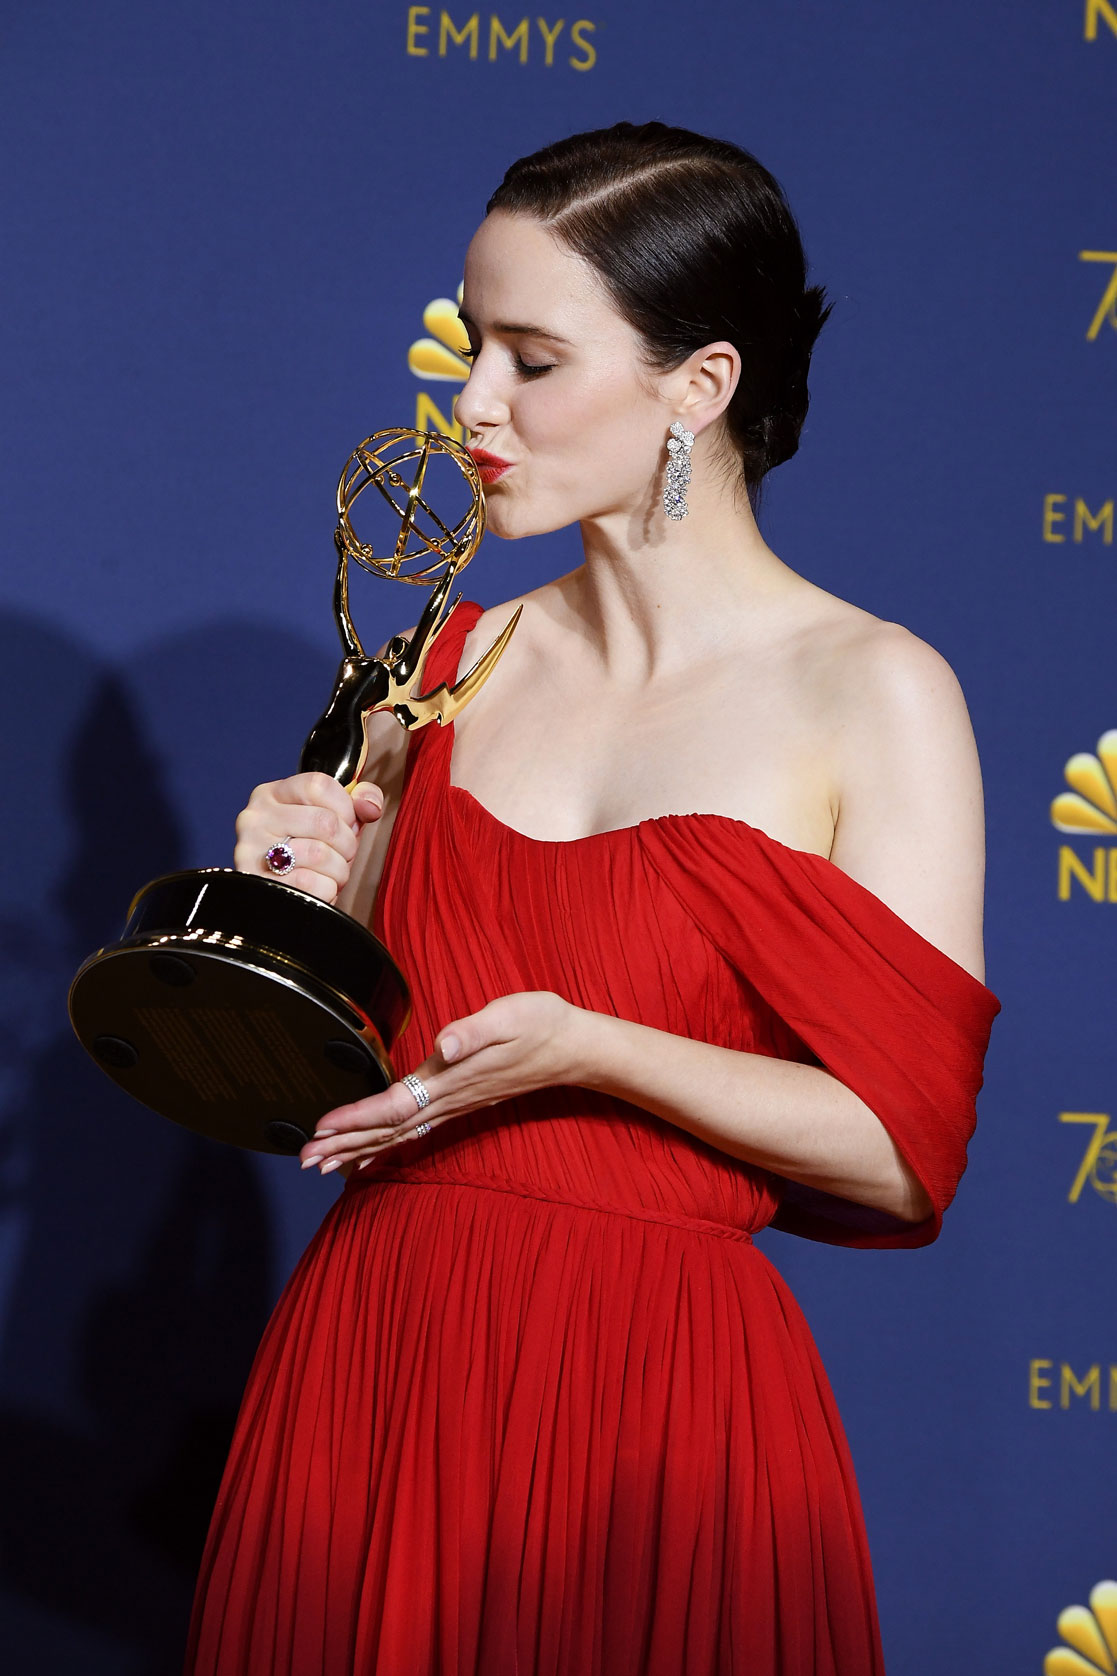 A woman wearing a red dress holding a golden trophy in her hands.